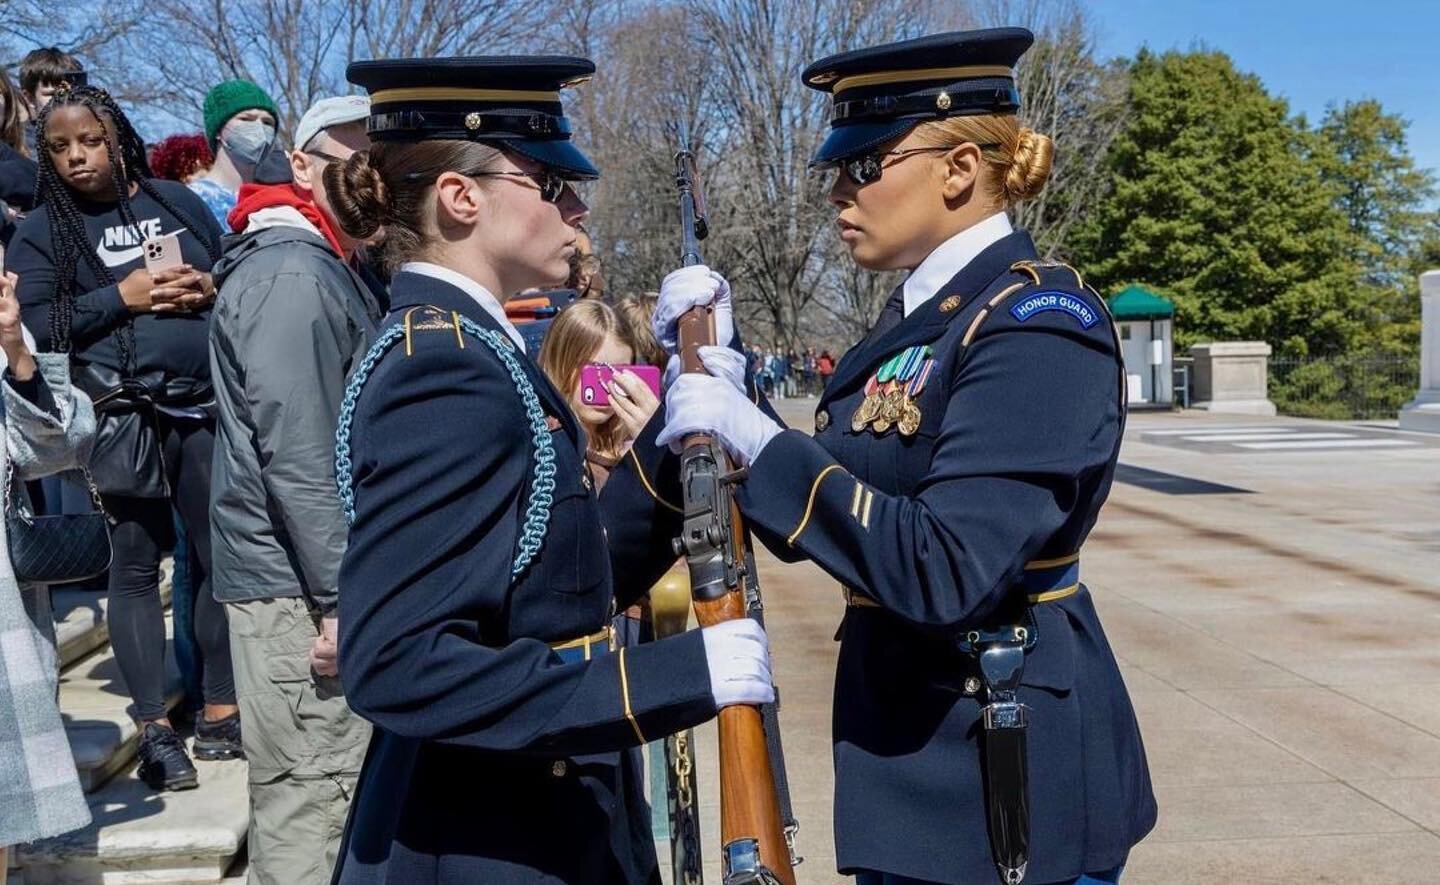 Pictured here is Sergeant Kamille Torres who just took her last walk at the Tomb of the Unknown Soldier. She is handing off her rifle to PFC Jessica Kwiatkowski, the newest female in the platoon. She is the first ever infantrywoman to serve at the To